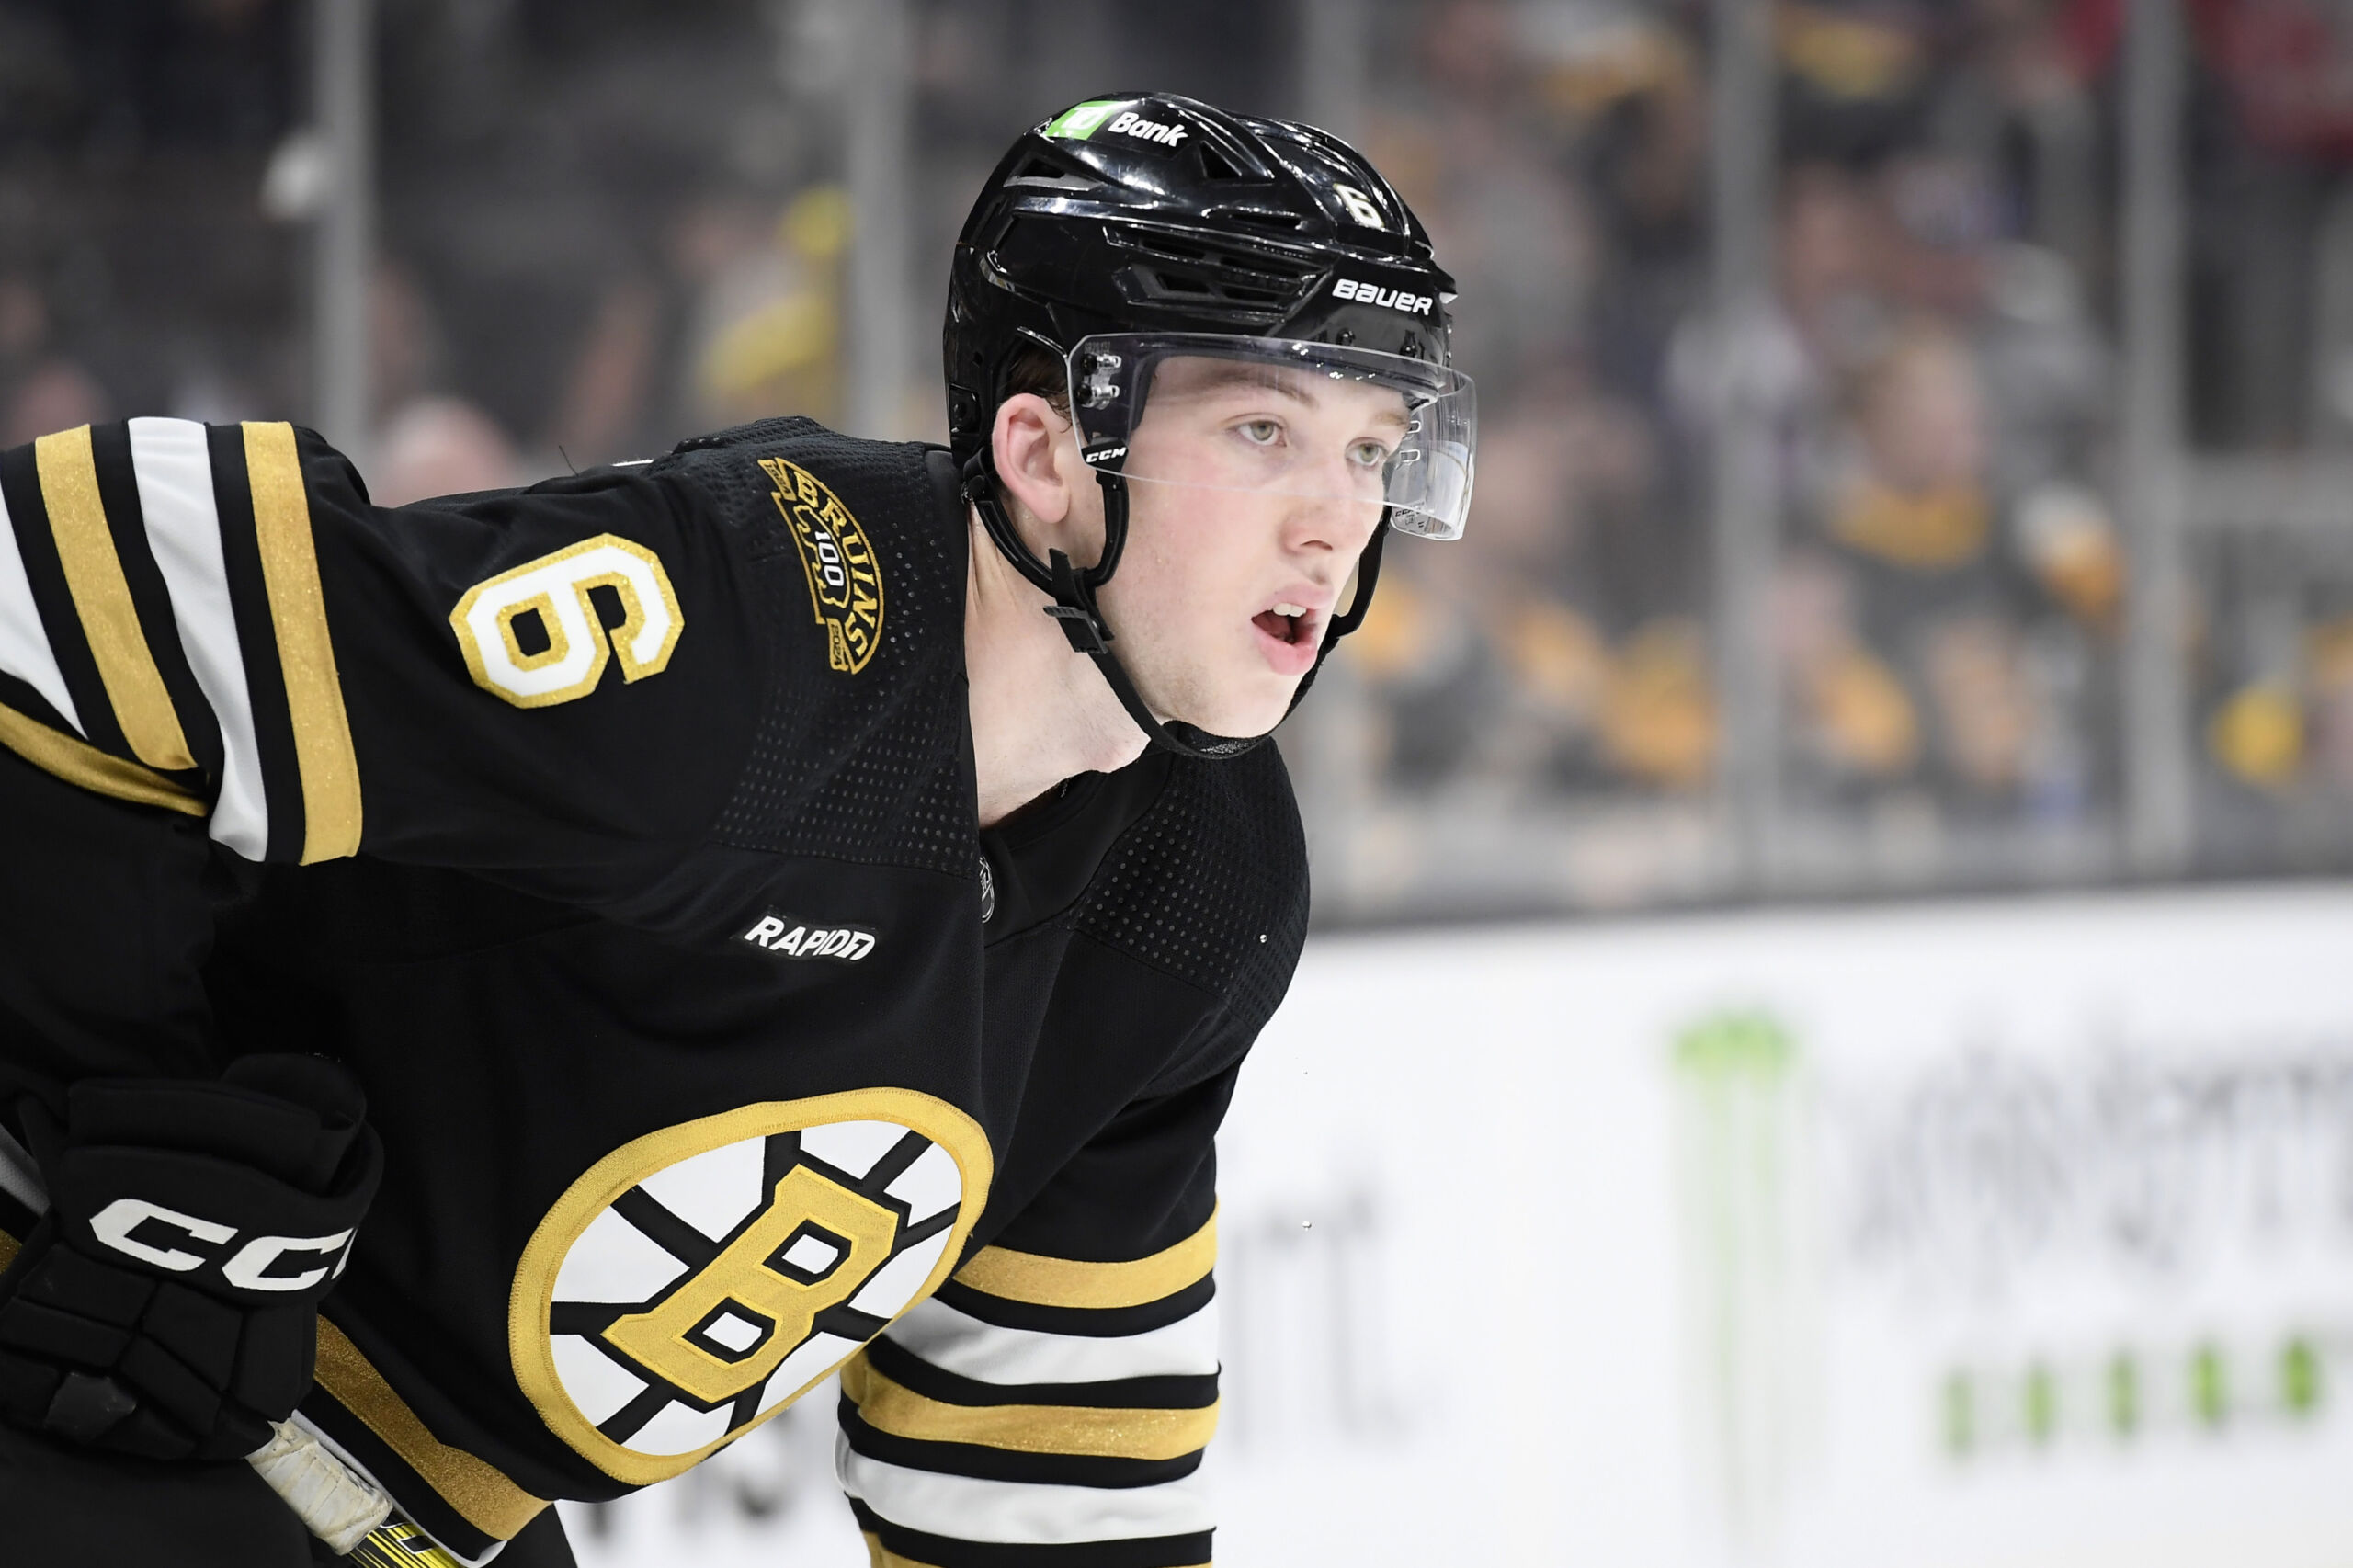 Bruins' Roster Announced For Second Preseason Game Tonight